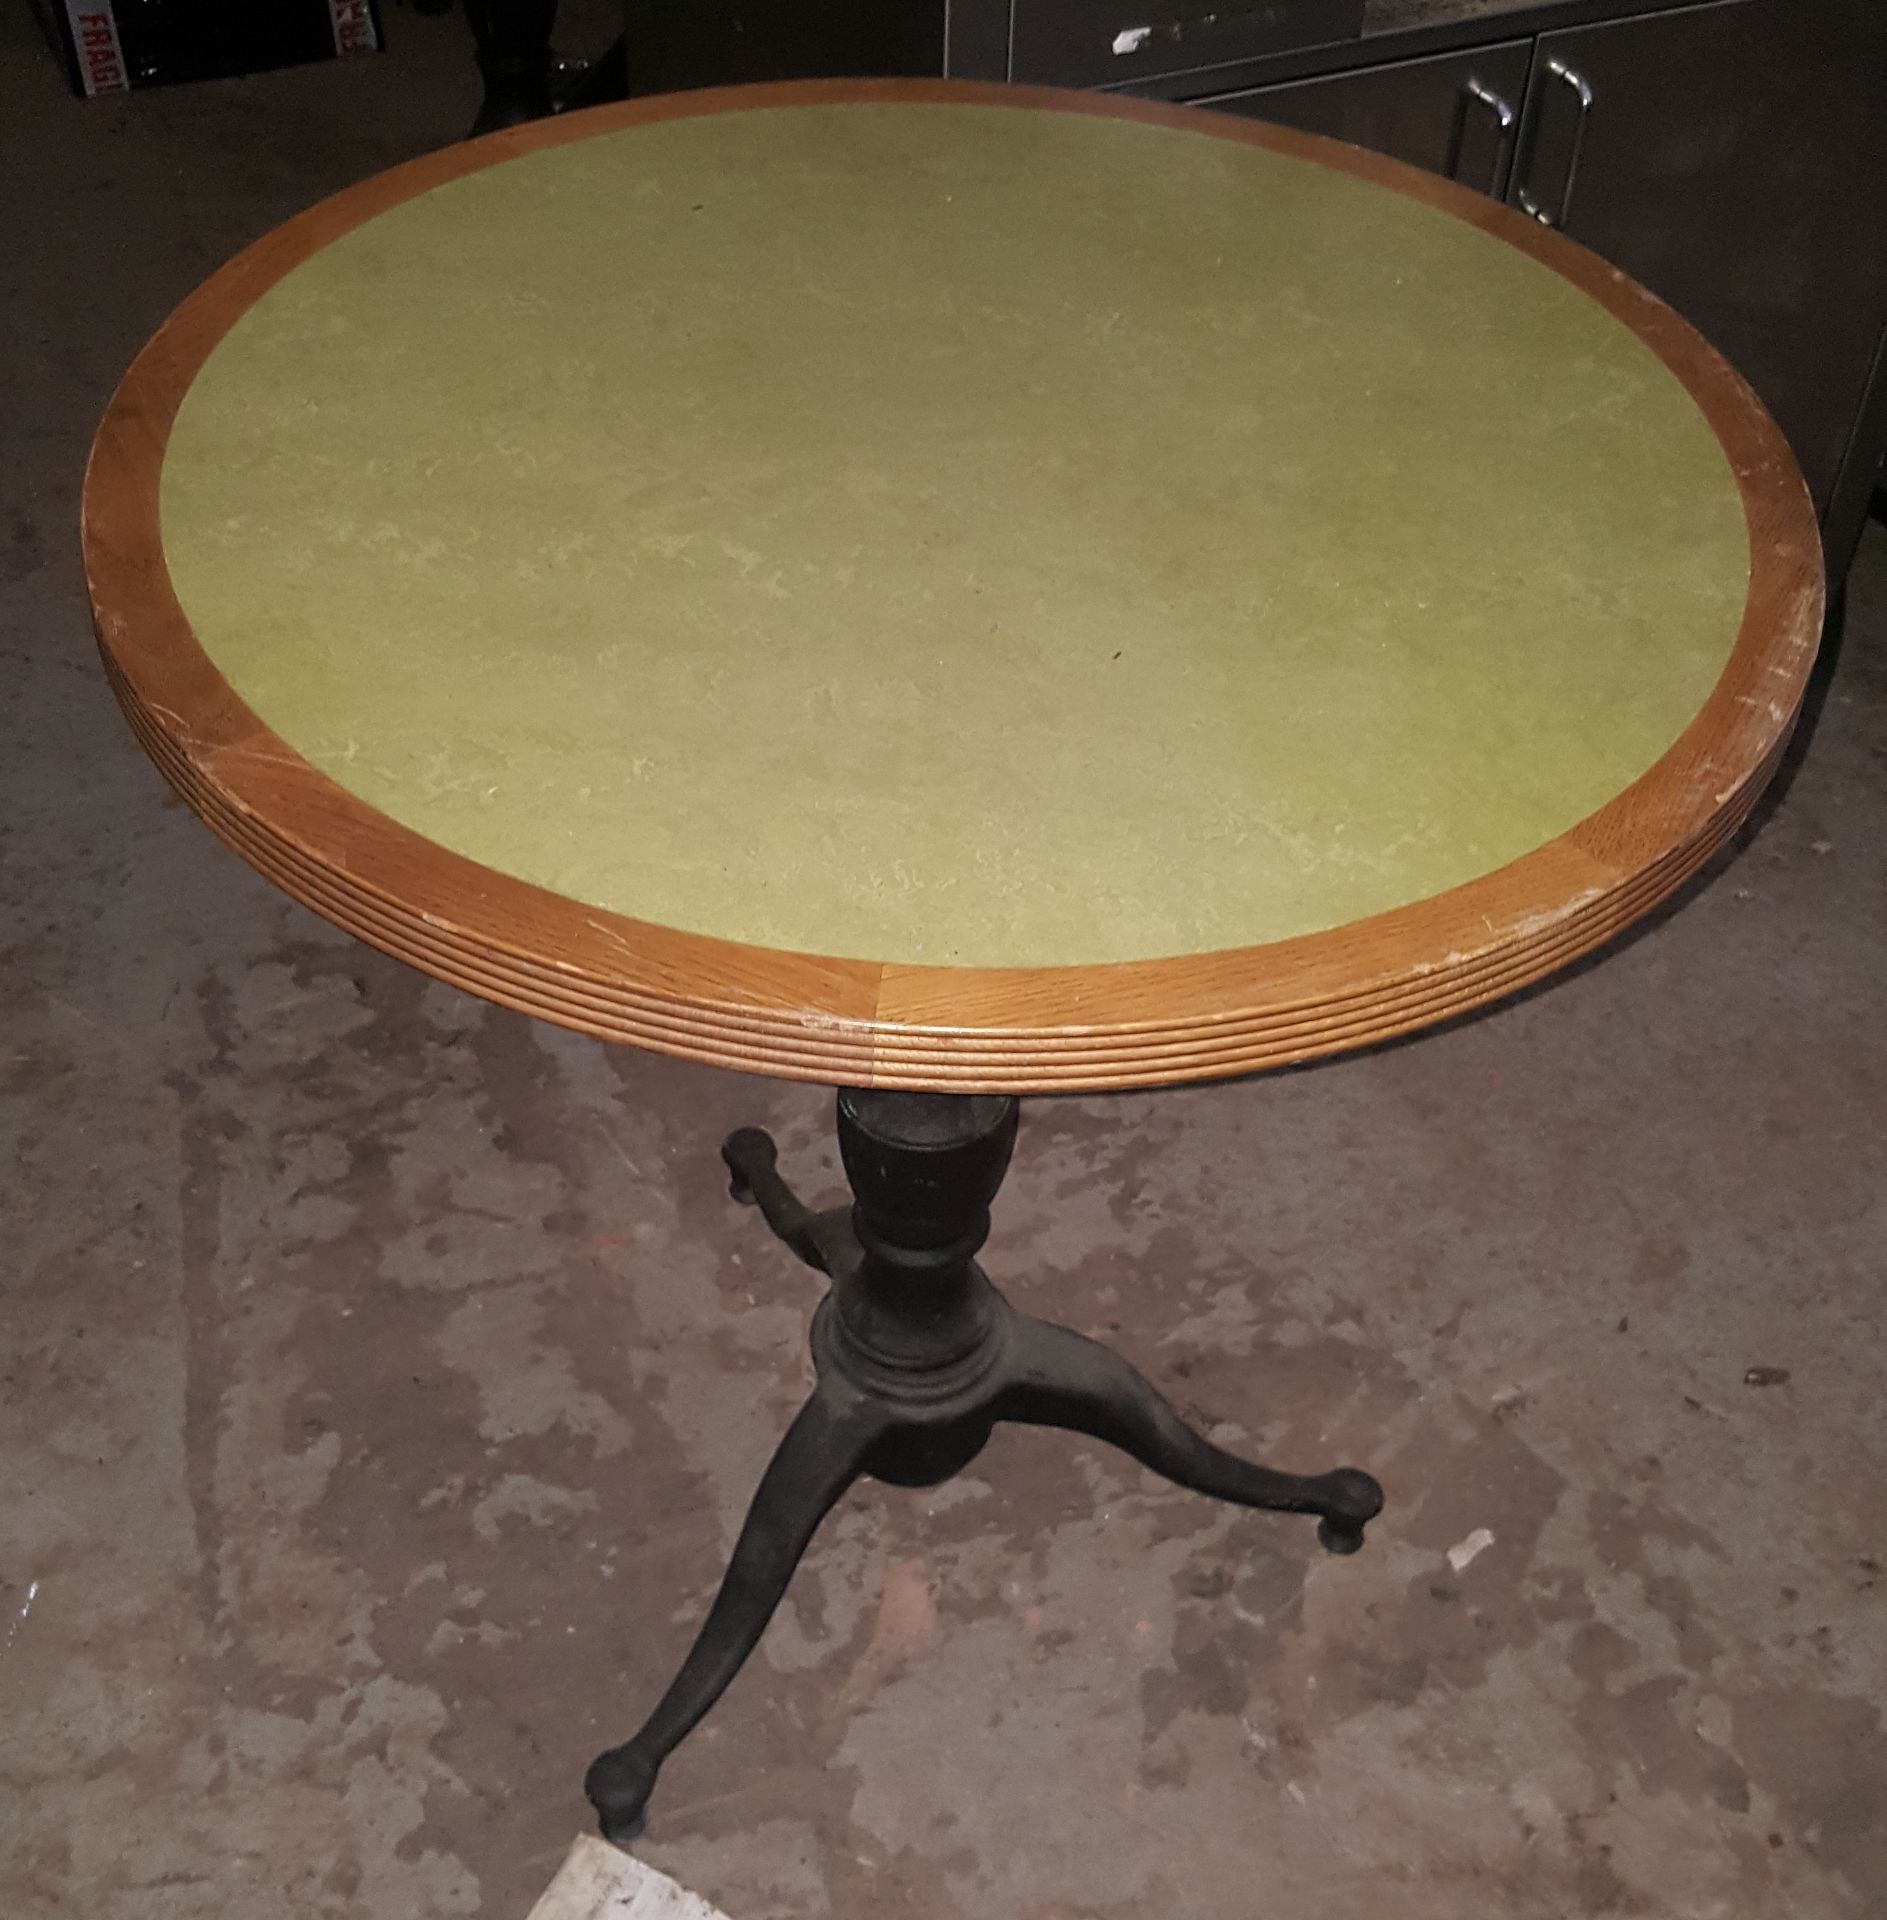 3 x Assorted Bistro Restaurant Tables With Green Faux Leather Inserts And Three-Legged Base - Image 5 of 9